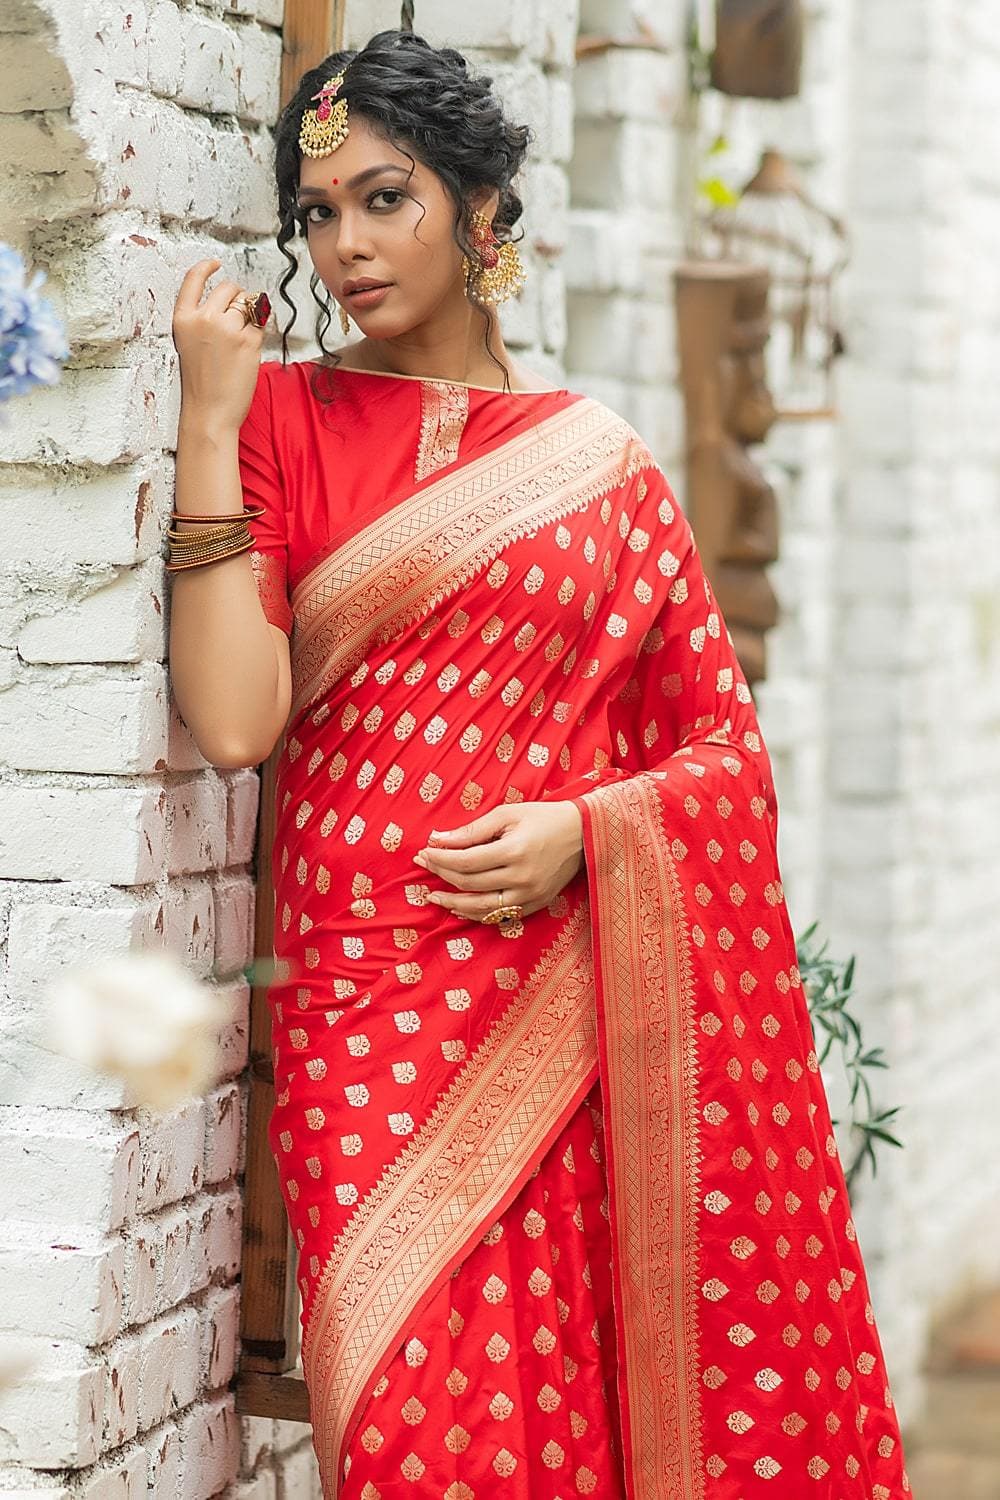 Gorgeous 👰 in chilli red kanchipuram saree in scattered buttas 💓 . .  Makeover by @ashtamudiwellness . . Visit :  𝗞𝗮𝗻𝗷𝗶𝘃𝗮𝗿𝗮𝗺𝘀𝗶𝗹𝗸𝘀.𝗰𝗼𝗺 for… | Instagram